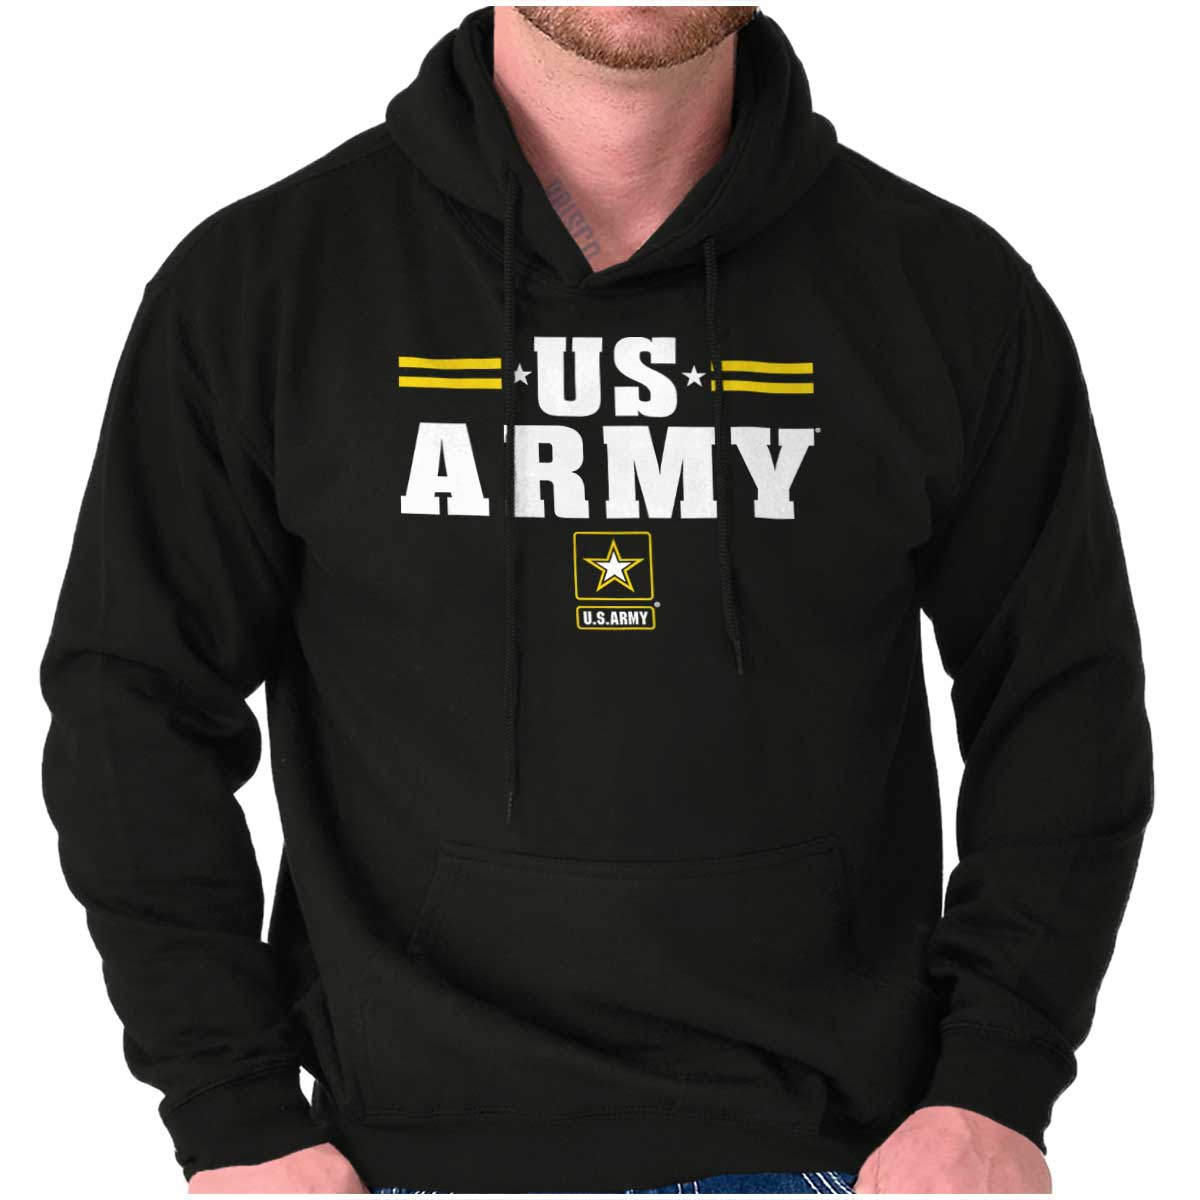 United States Army Officially Licensed Logo Hoodies Sweat Shirts ...